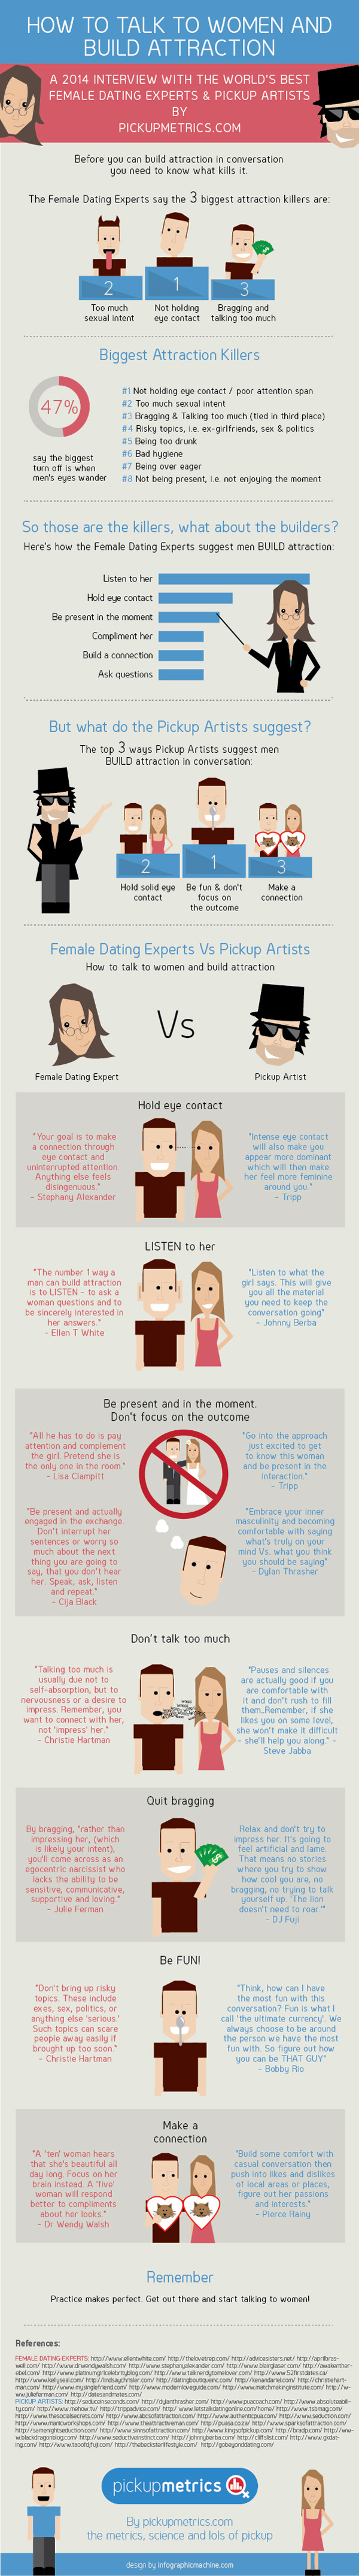 How-to-talk-to-women-infographic